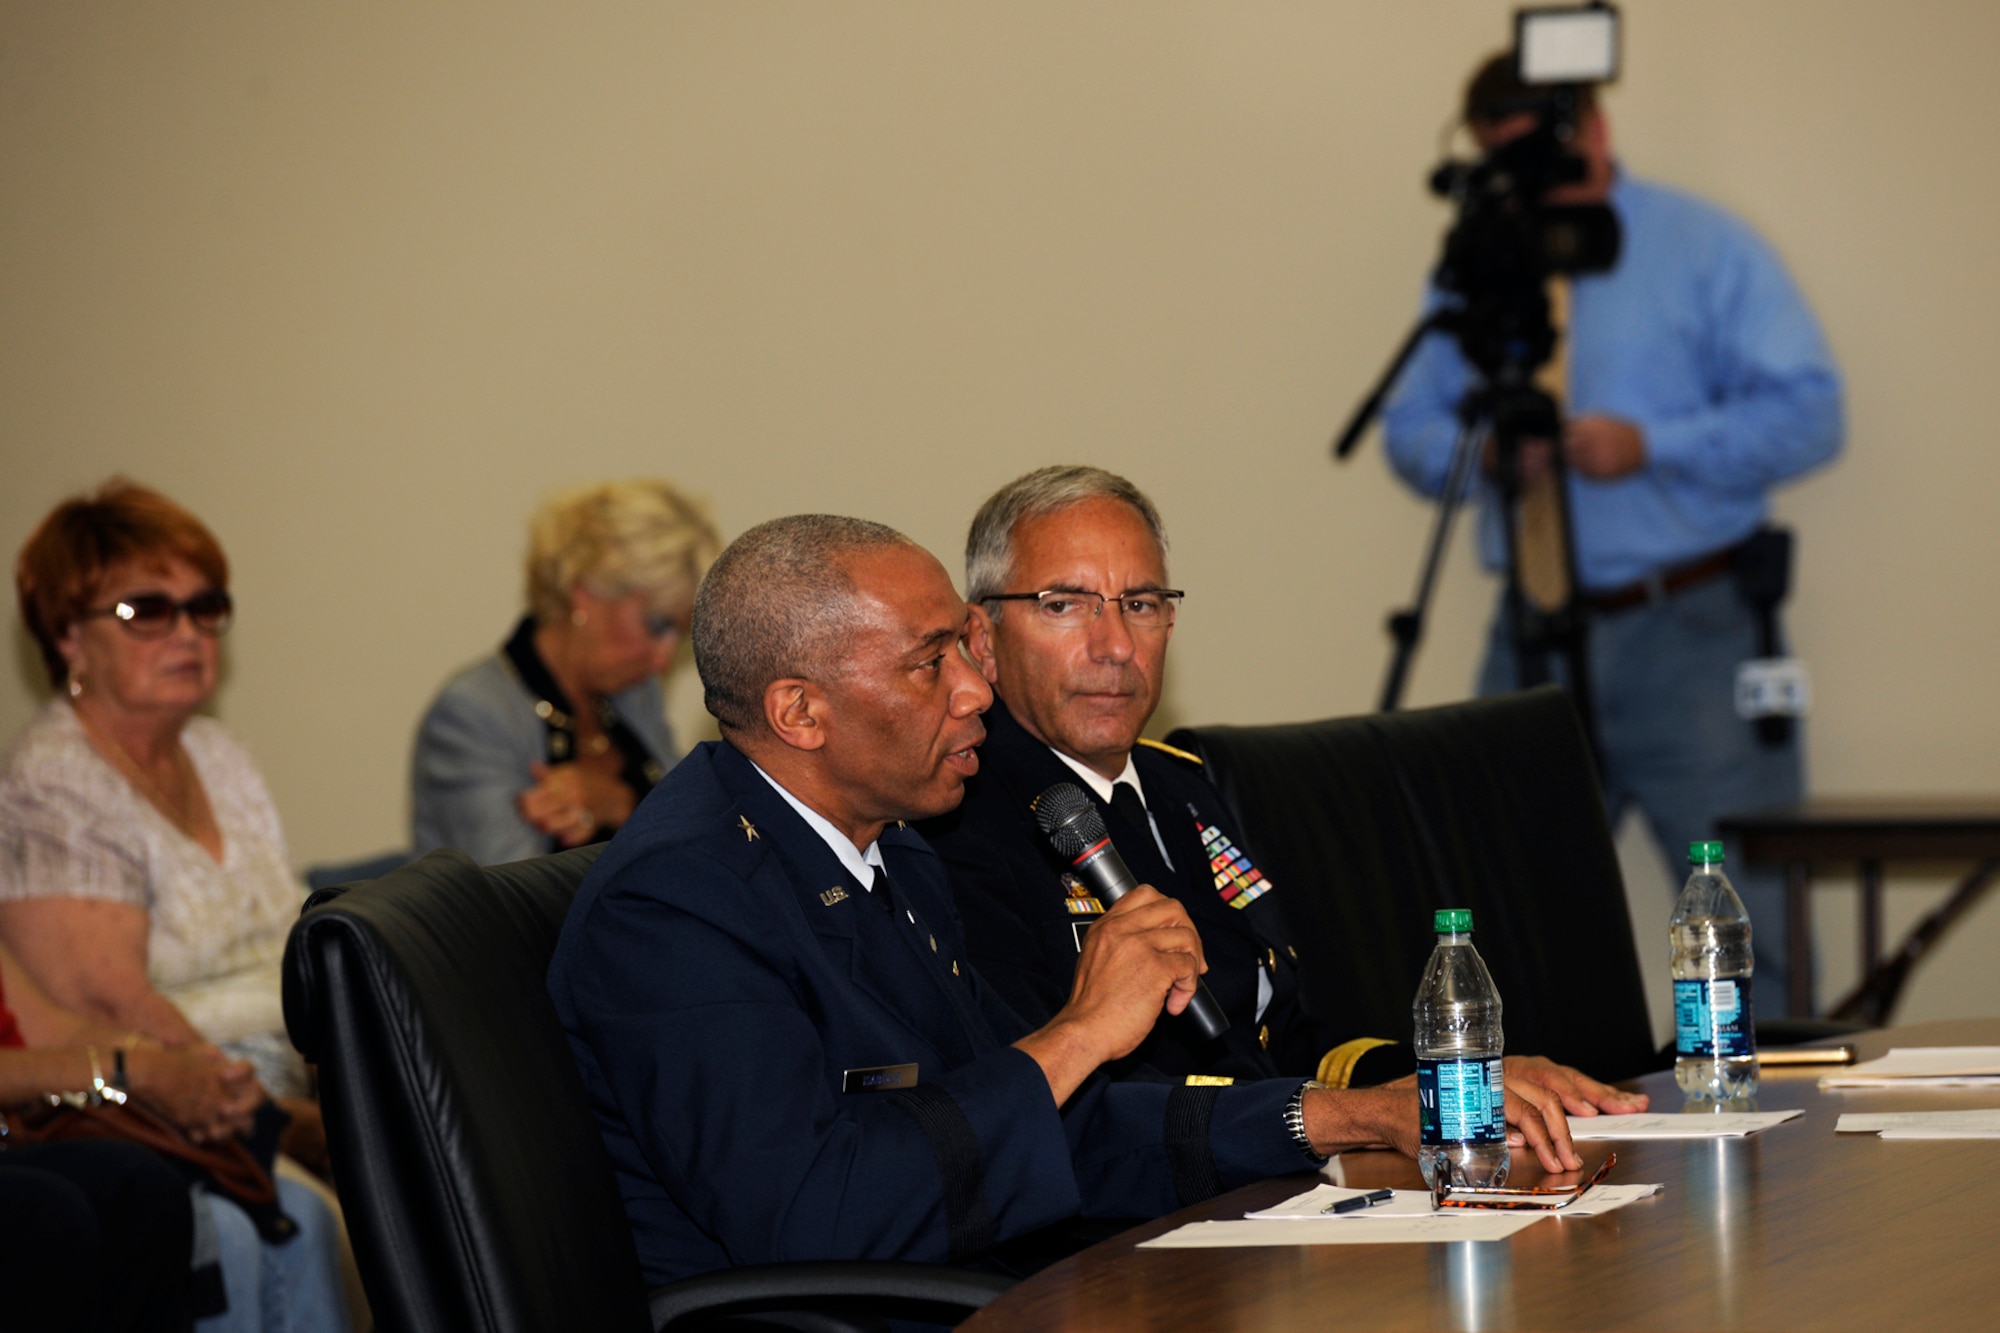 130914-Z-EZ686-136 – Major Gen. Gregory Vadnais listens as Brig. Gen. Leonard Isabelle testifies during a hearing of the National Commission of the Structure of the Air Force at the Chesterfield (Mich.) Township Hall, near Selfridge Air National Guard Base, Mich., Sept. 14, 2013. Vadnais is the adjutant general of Michigan. Isabelle is the commander of the Michigan Air National Guard. The generals, Airmen from around the Michigan ANG, and several community leaders provided testimony to the commission on the operations of the ANG and the relationship between the ANG and the local community. (U.S. Air National Guard photo by MSgt. David Kujawa/Released)